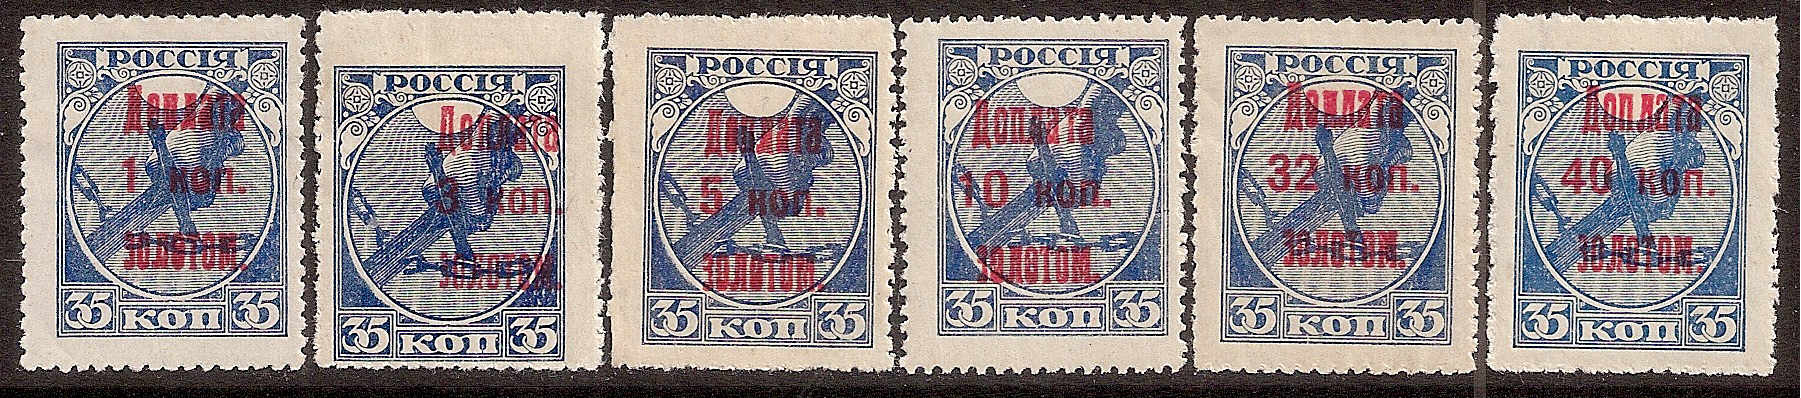 PRussia Specialized - ostage Dues Postage Dues Scott J1/9 